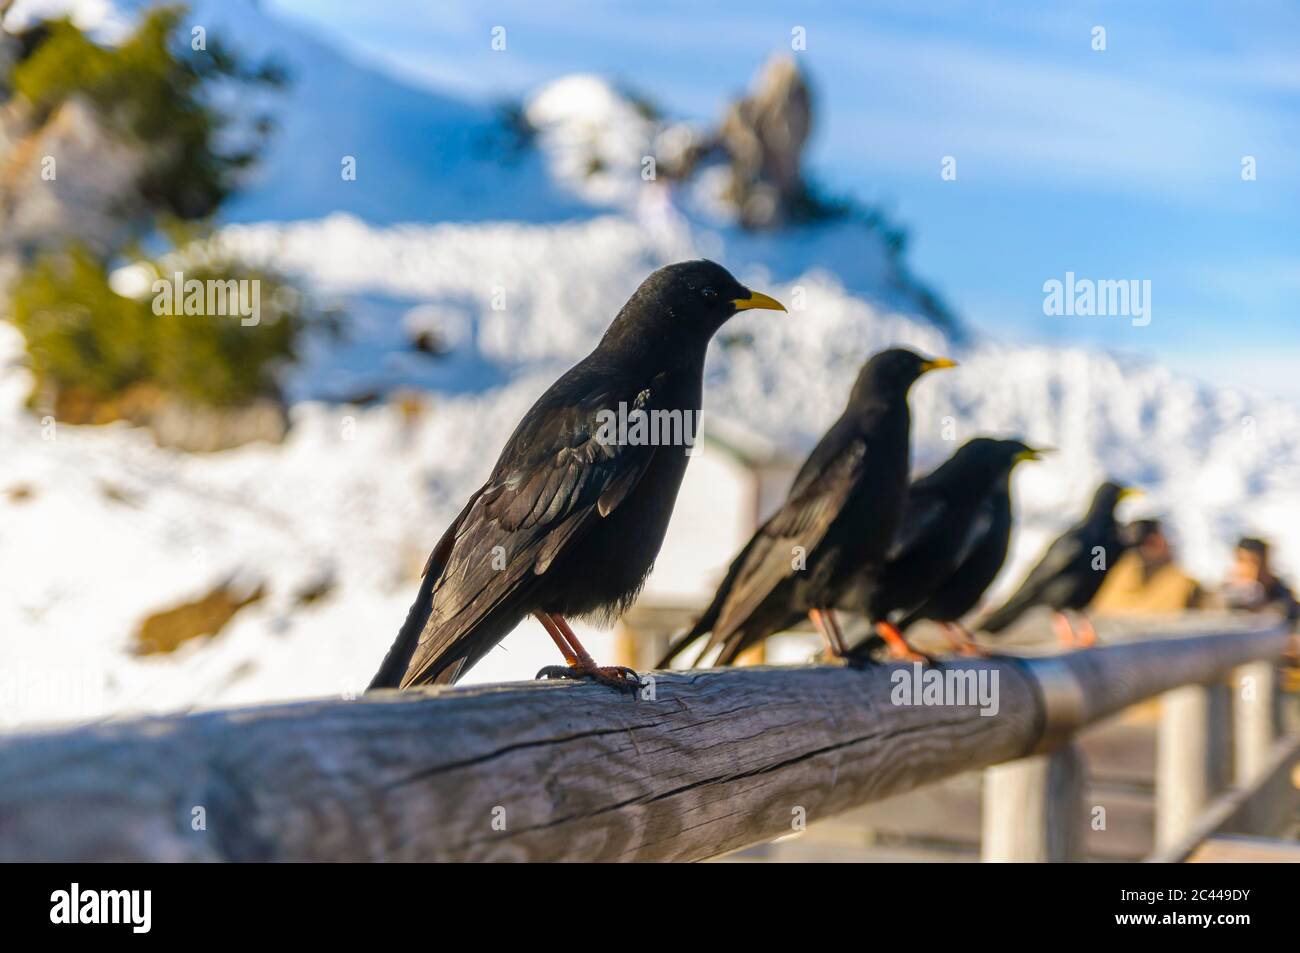 Close-up of ravens perching on wooden railing during sunny day Stock Photo